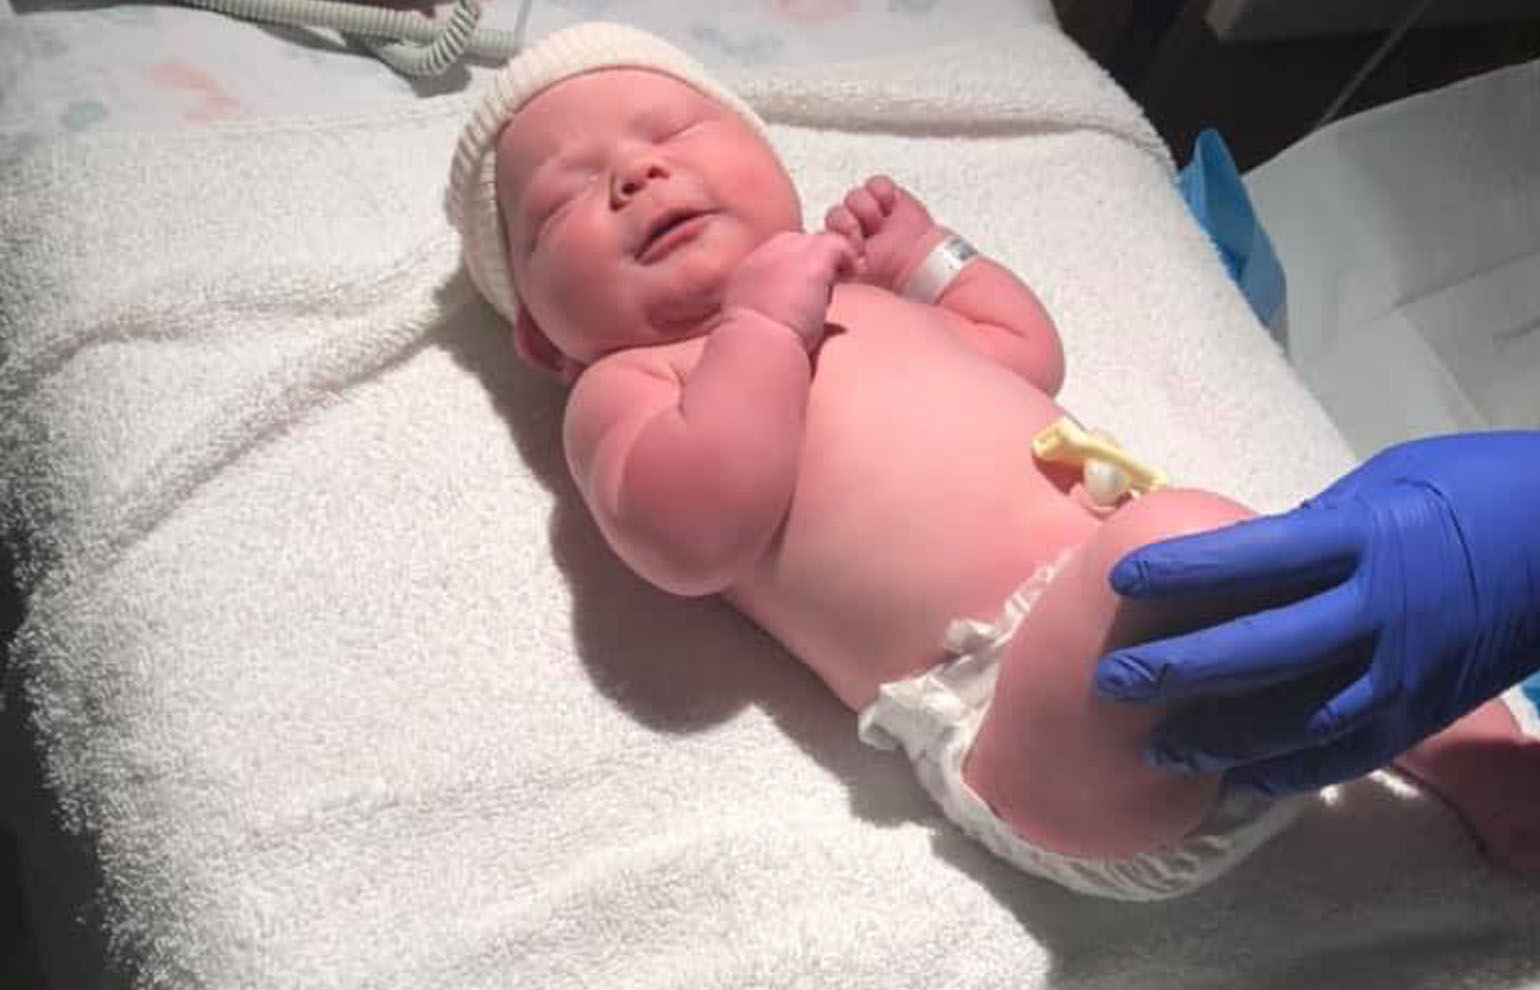 Devan Milliman and Josh Morrow welcomed their daughter, Gracie, into the world at 3:38 a.m. on New Year's Day. Gracie is the first baby born in Clark County in 2019. “I think it’s really cool,” Milliman said of having Clark County’s New Year’s baby.